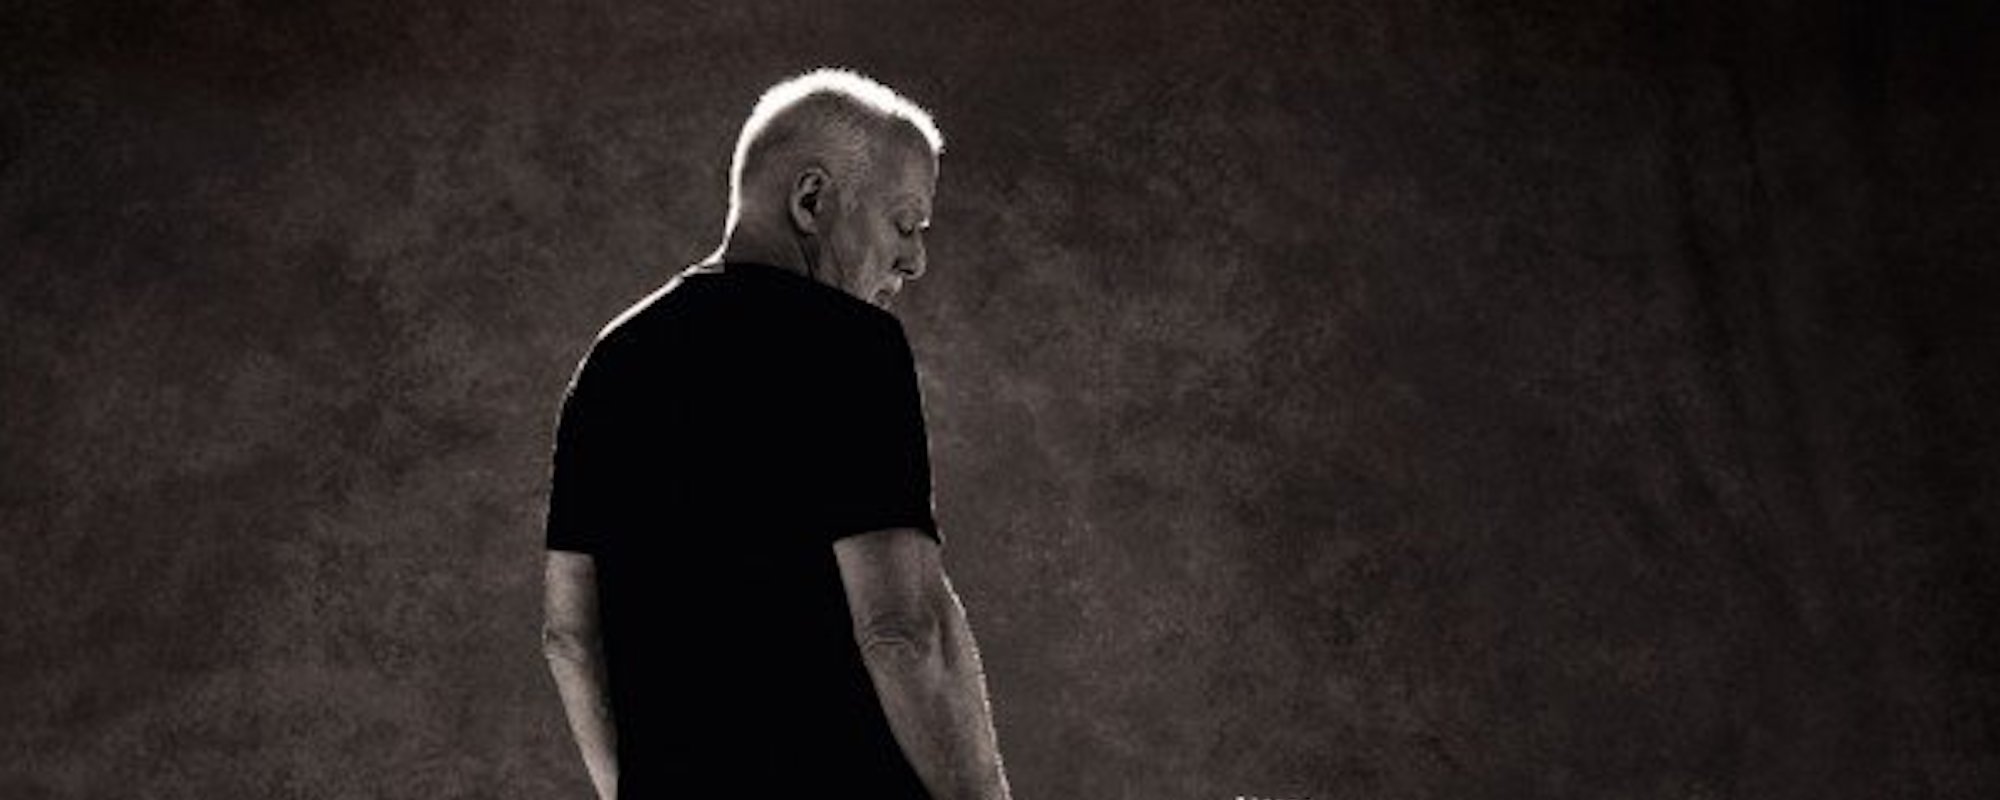 Pink Floyd’s David Gilmour on the Band Touring Again: “I Suppose it’s a Possibility”